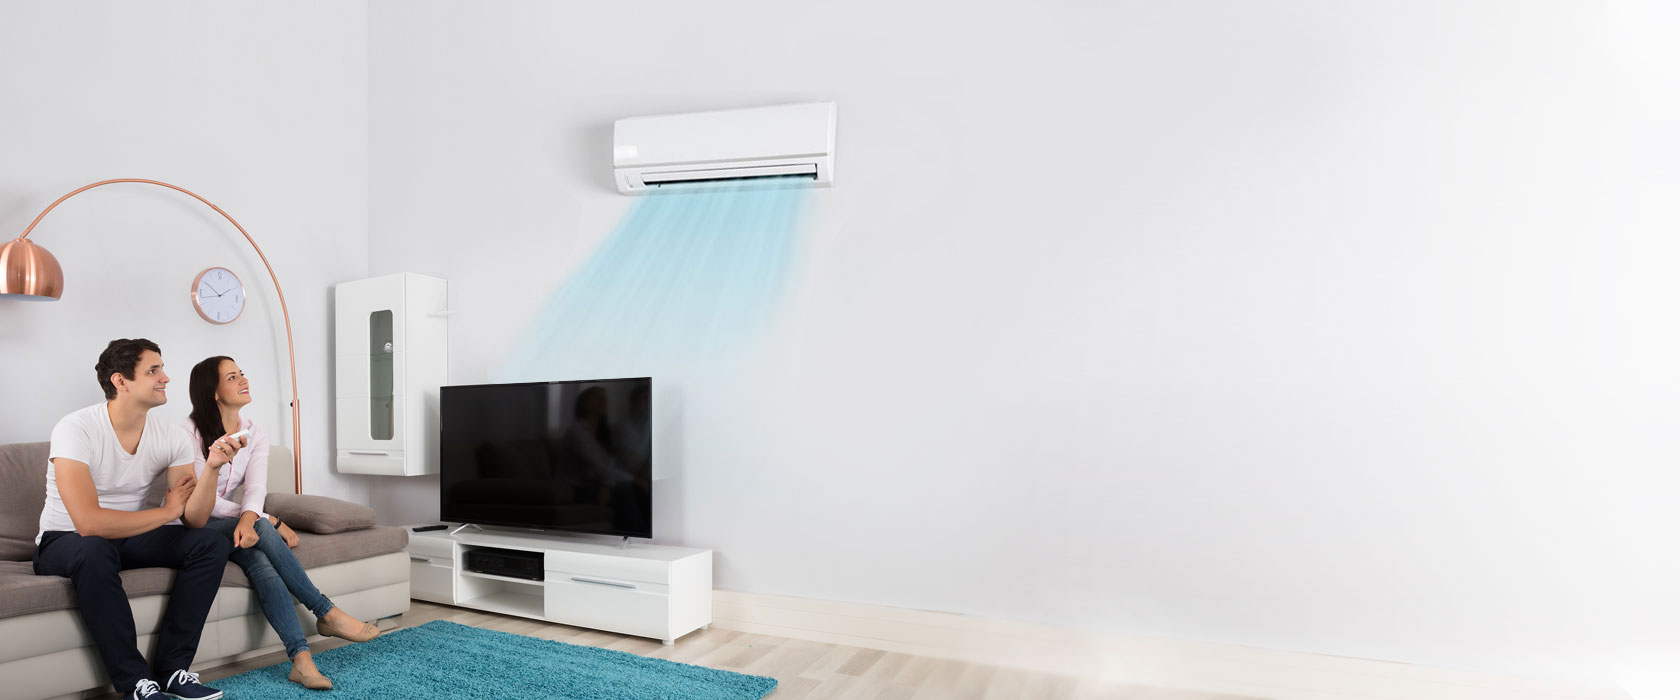 Cool your family during summer or warm up your home during winter with a new reverse cycle air conditioning system